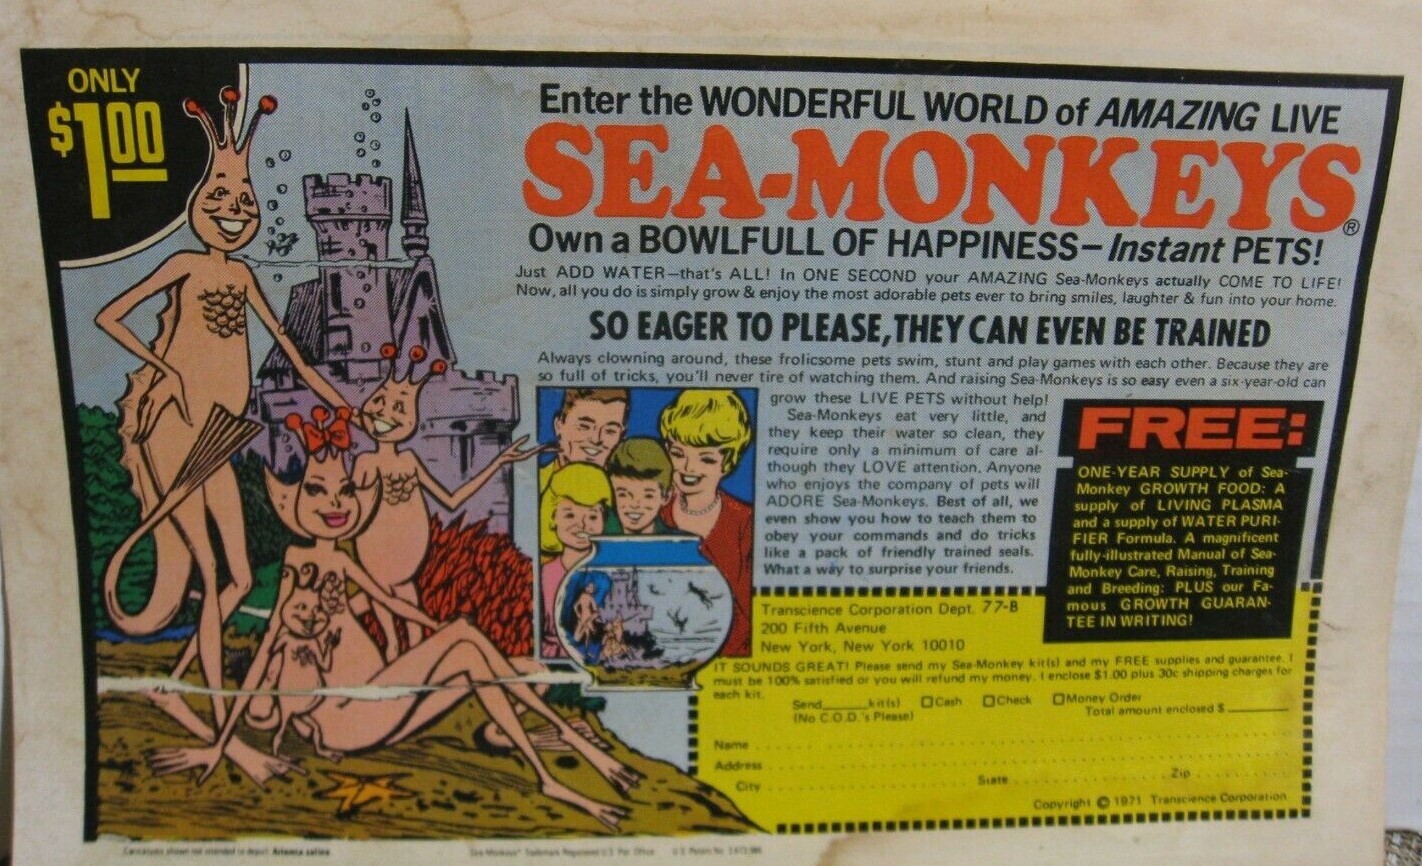 An earlier 1970 Sea-Monkeys comic book ad. Not much changed in the ad 8 years later. Source is an Ebay listing with free usage rights.